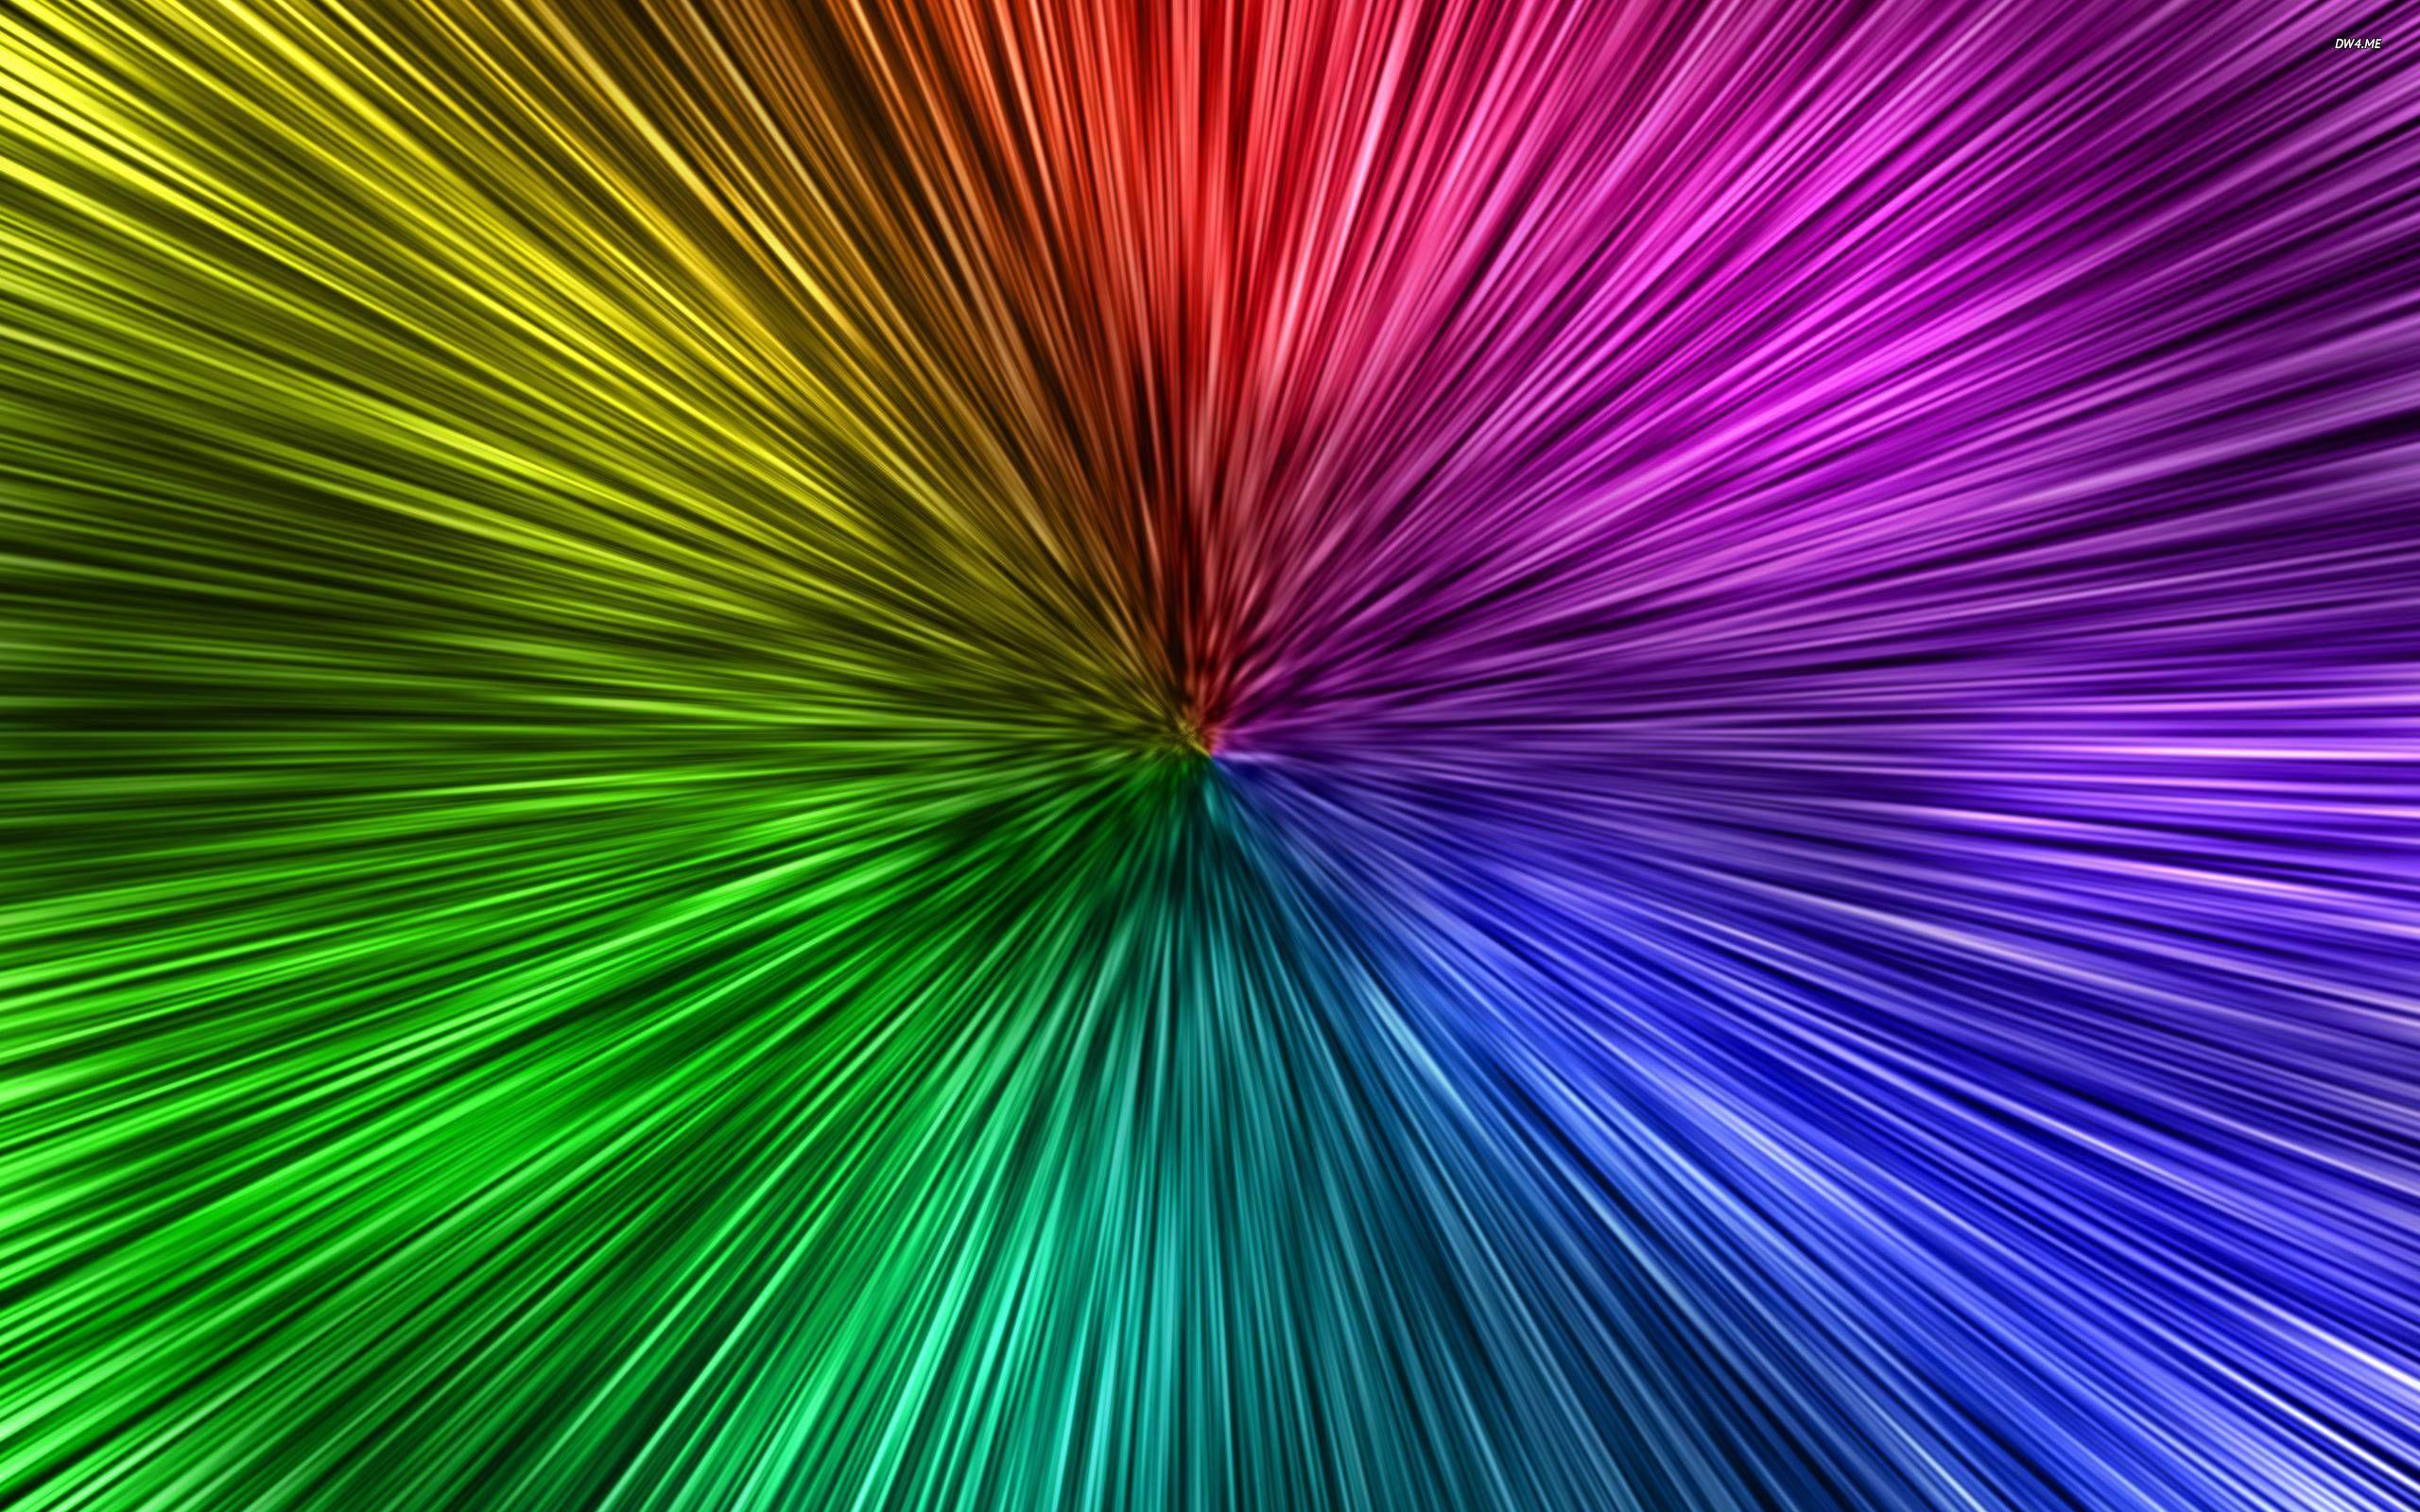 Abstract Neon Wallpaper Background (2560×1600). Neon Background, Neon Wallpaper, Rainbow Background